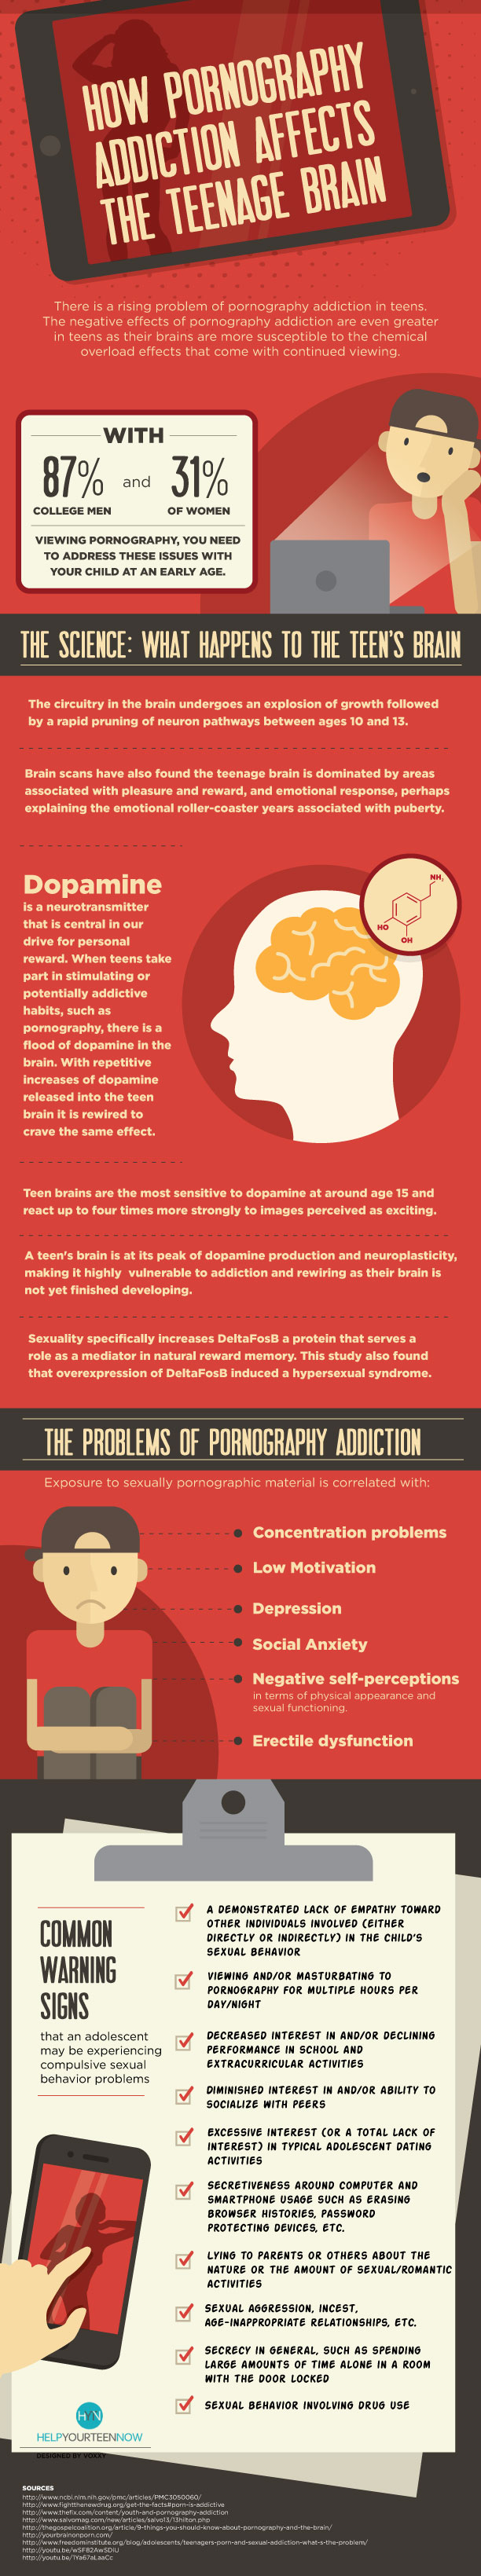 How Pornography Addiction Affects the Teenage Brain – Infographic